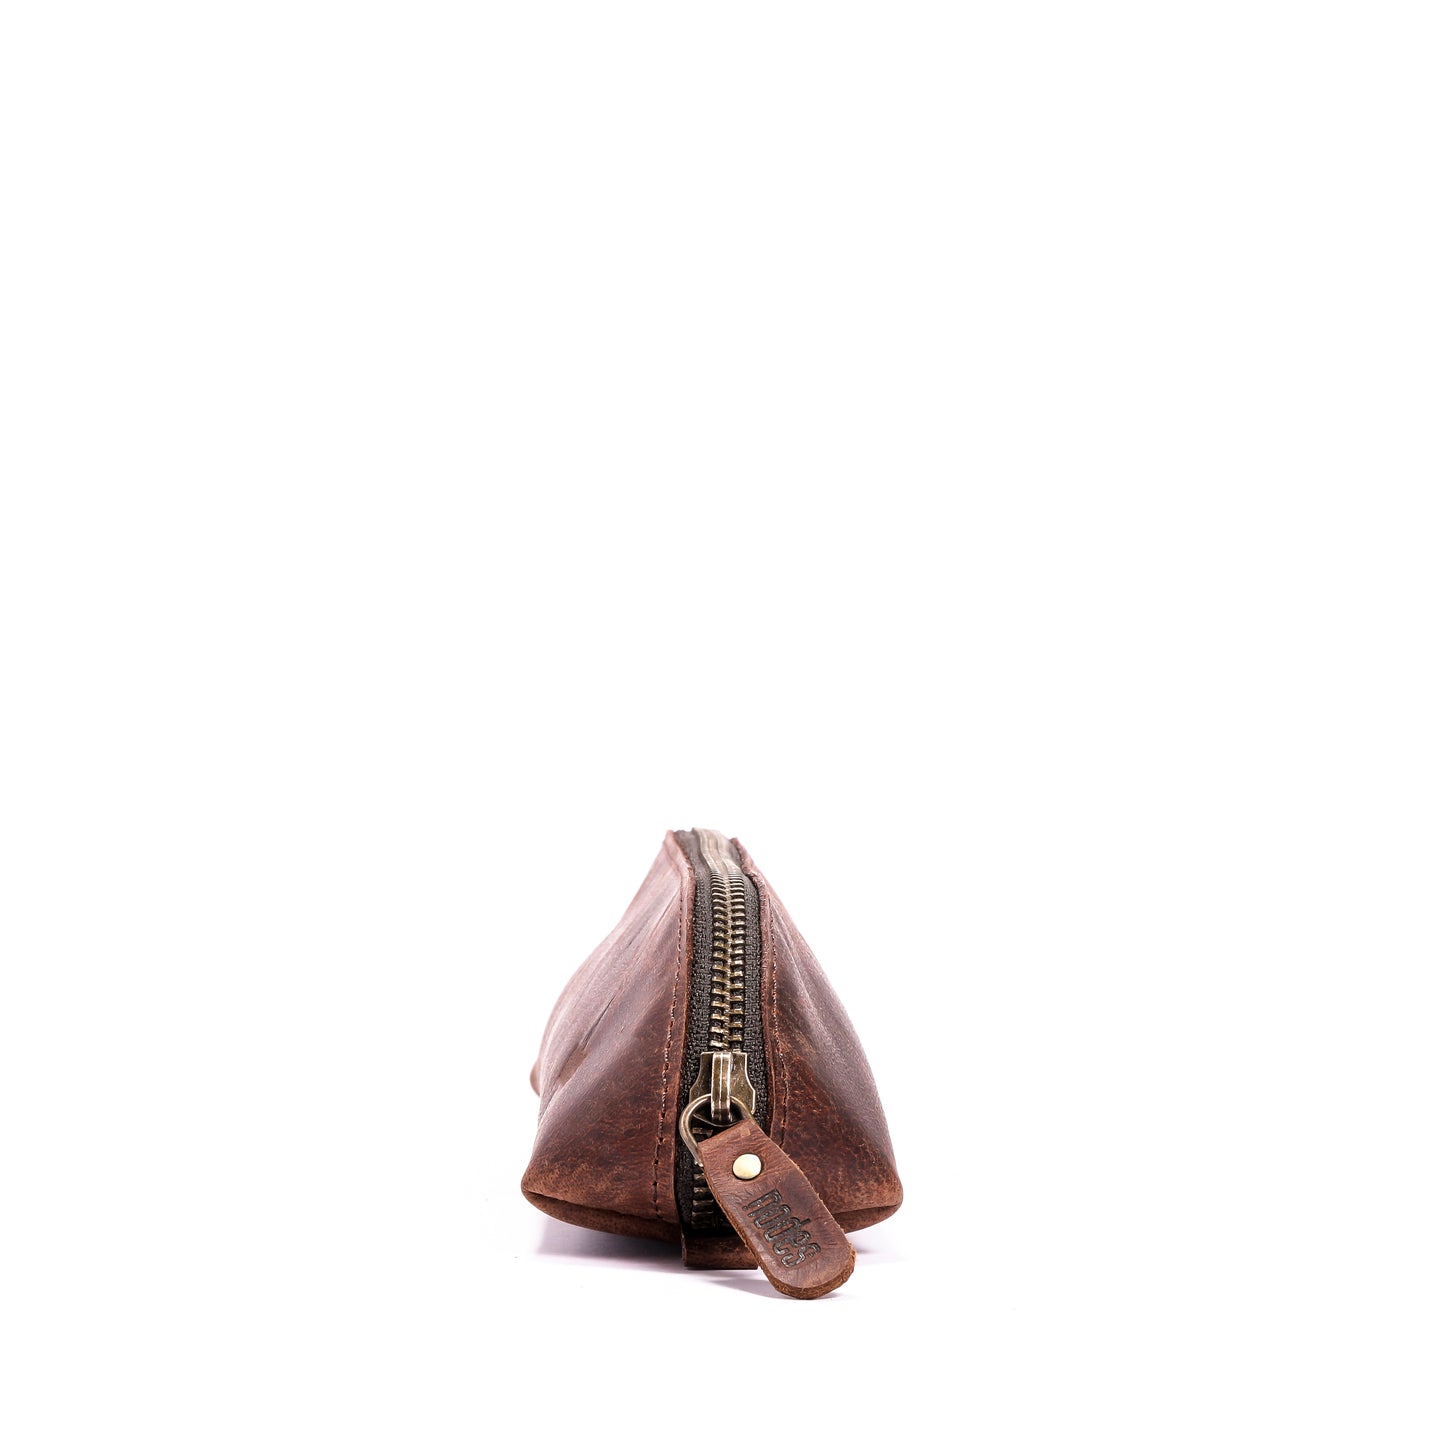 Donjon - Leather Carry On Pouch